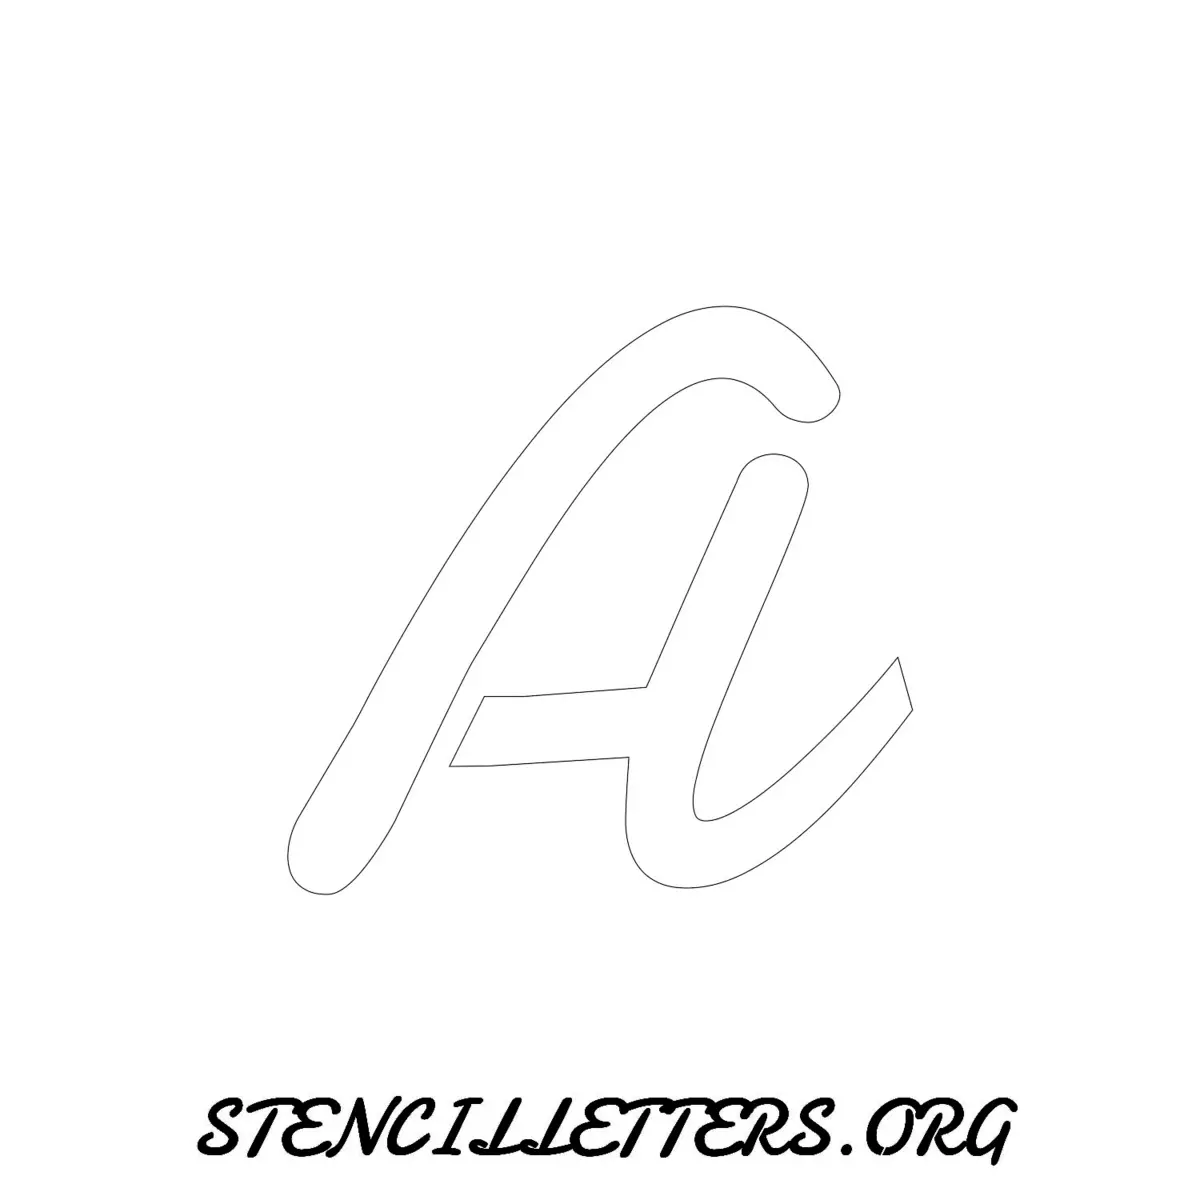 4 Inch Free Printable Individual 139 Cursive Uppercase Letter Stencils -  Stencil Letters Org